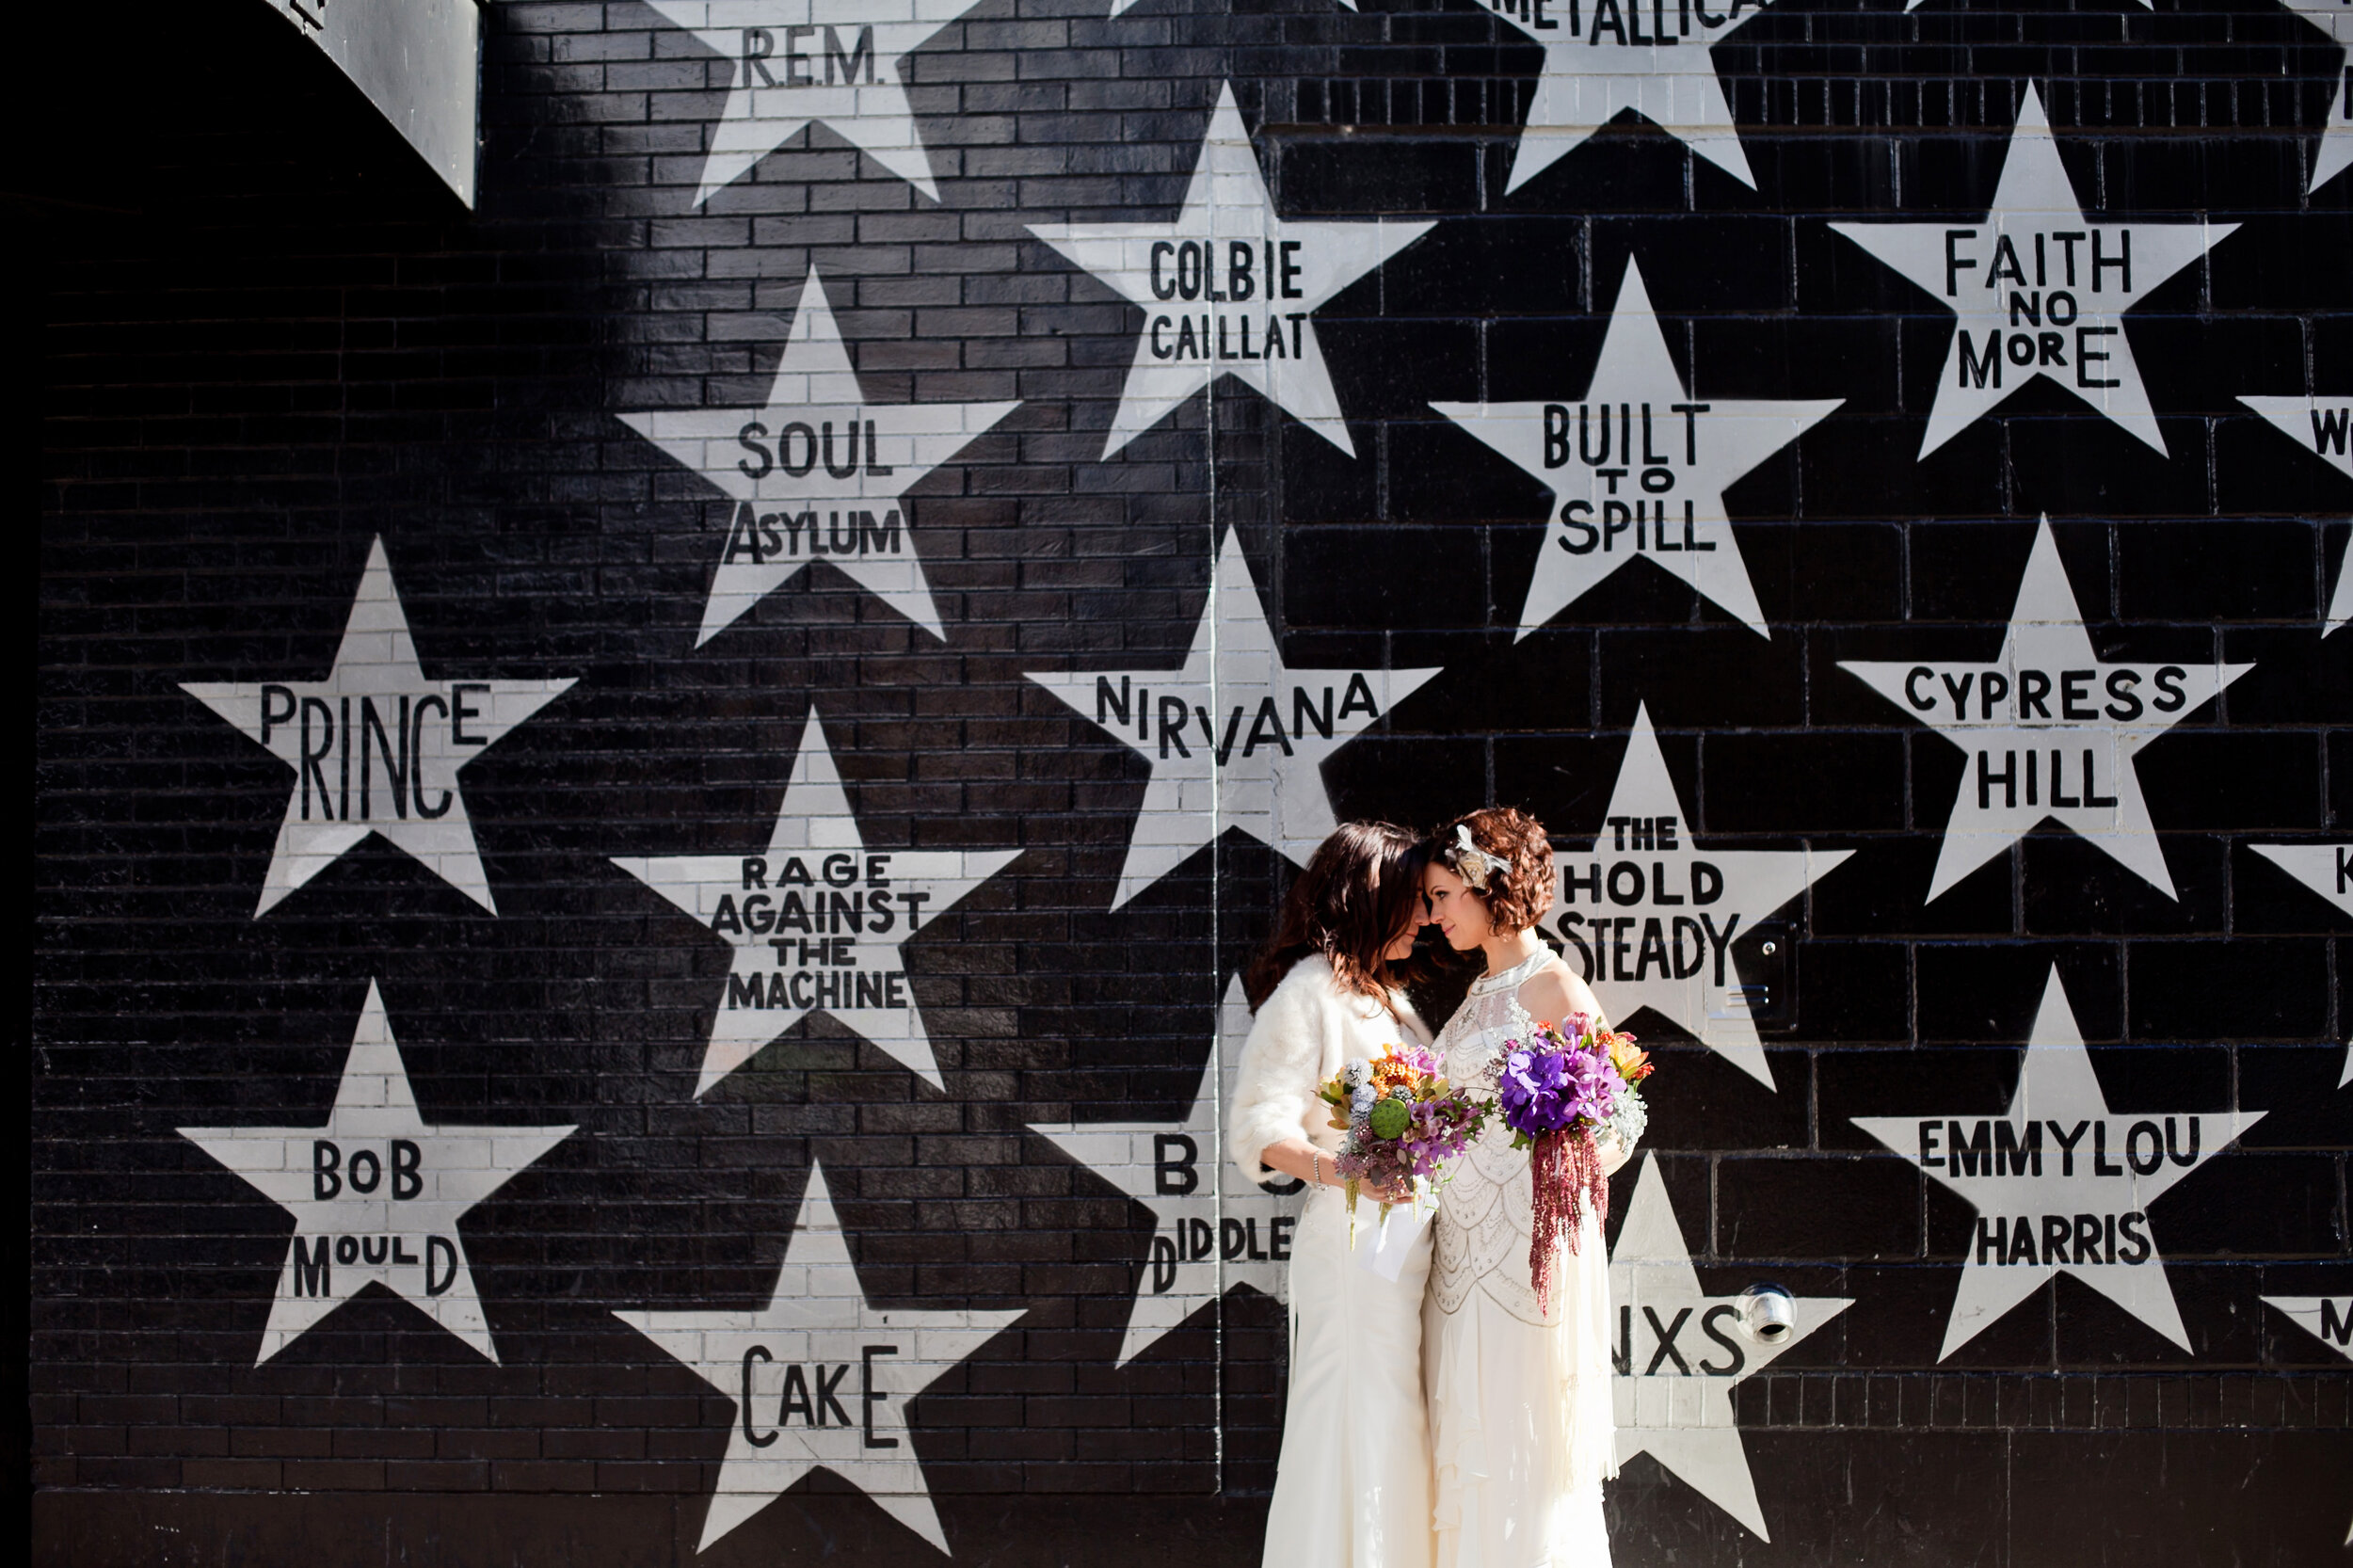 16 two brides star wall music wall unique wedding back drops candid first look shots Life Design Events .jpg